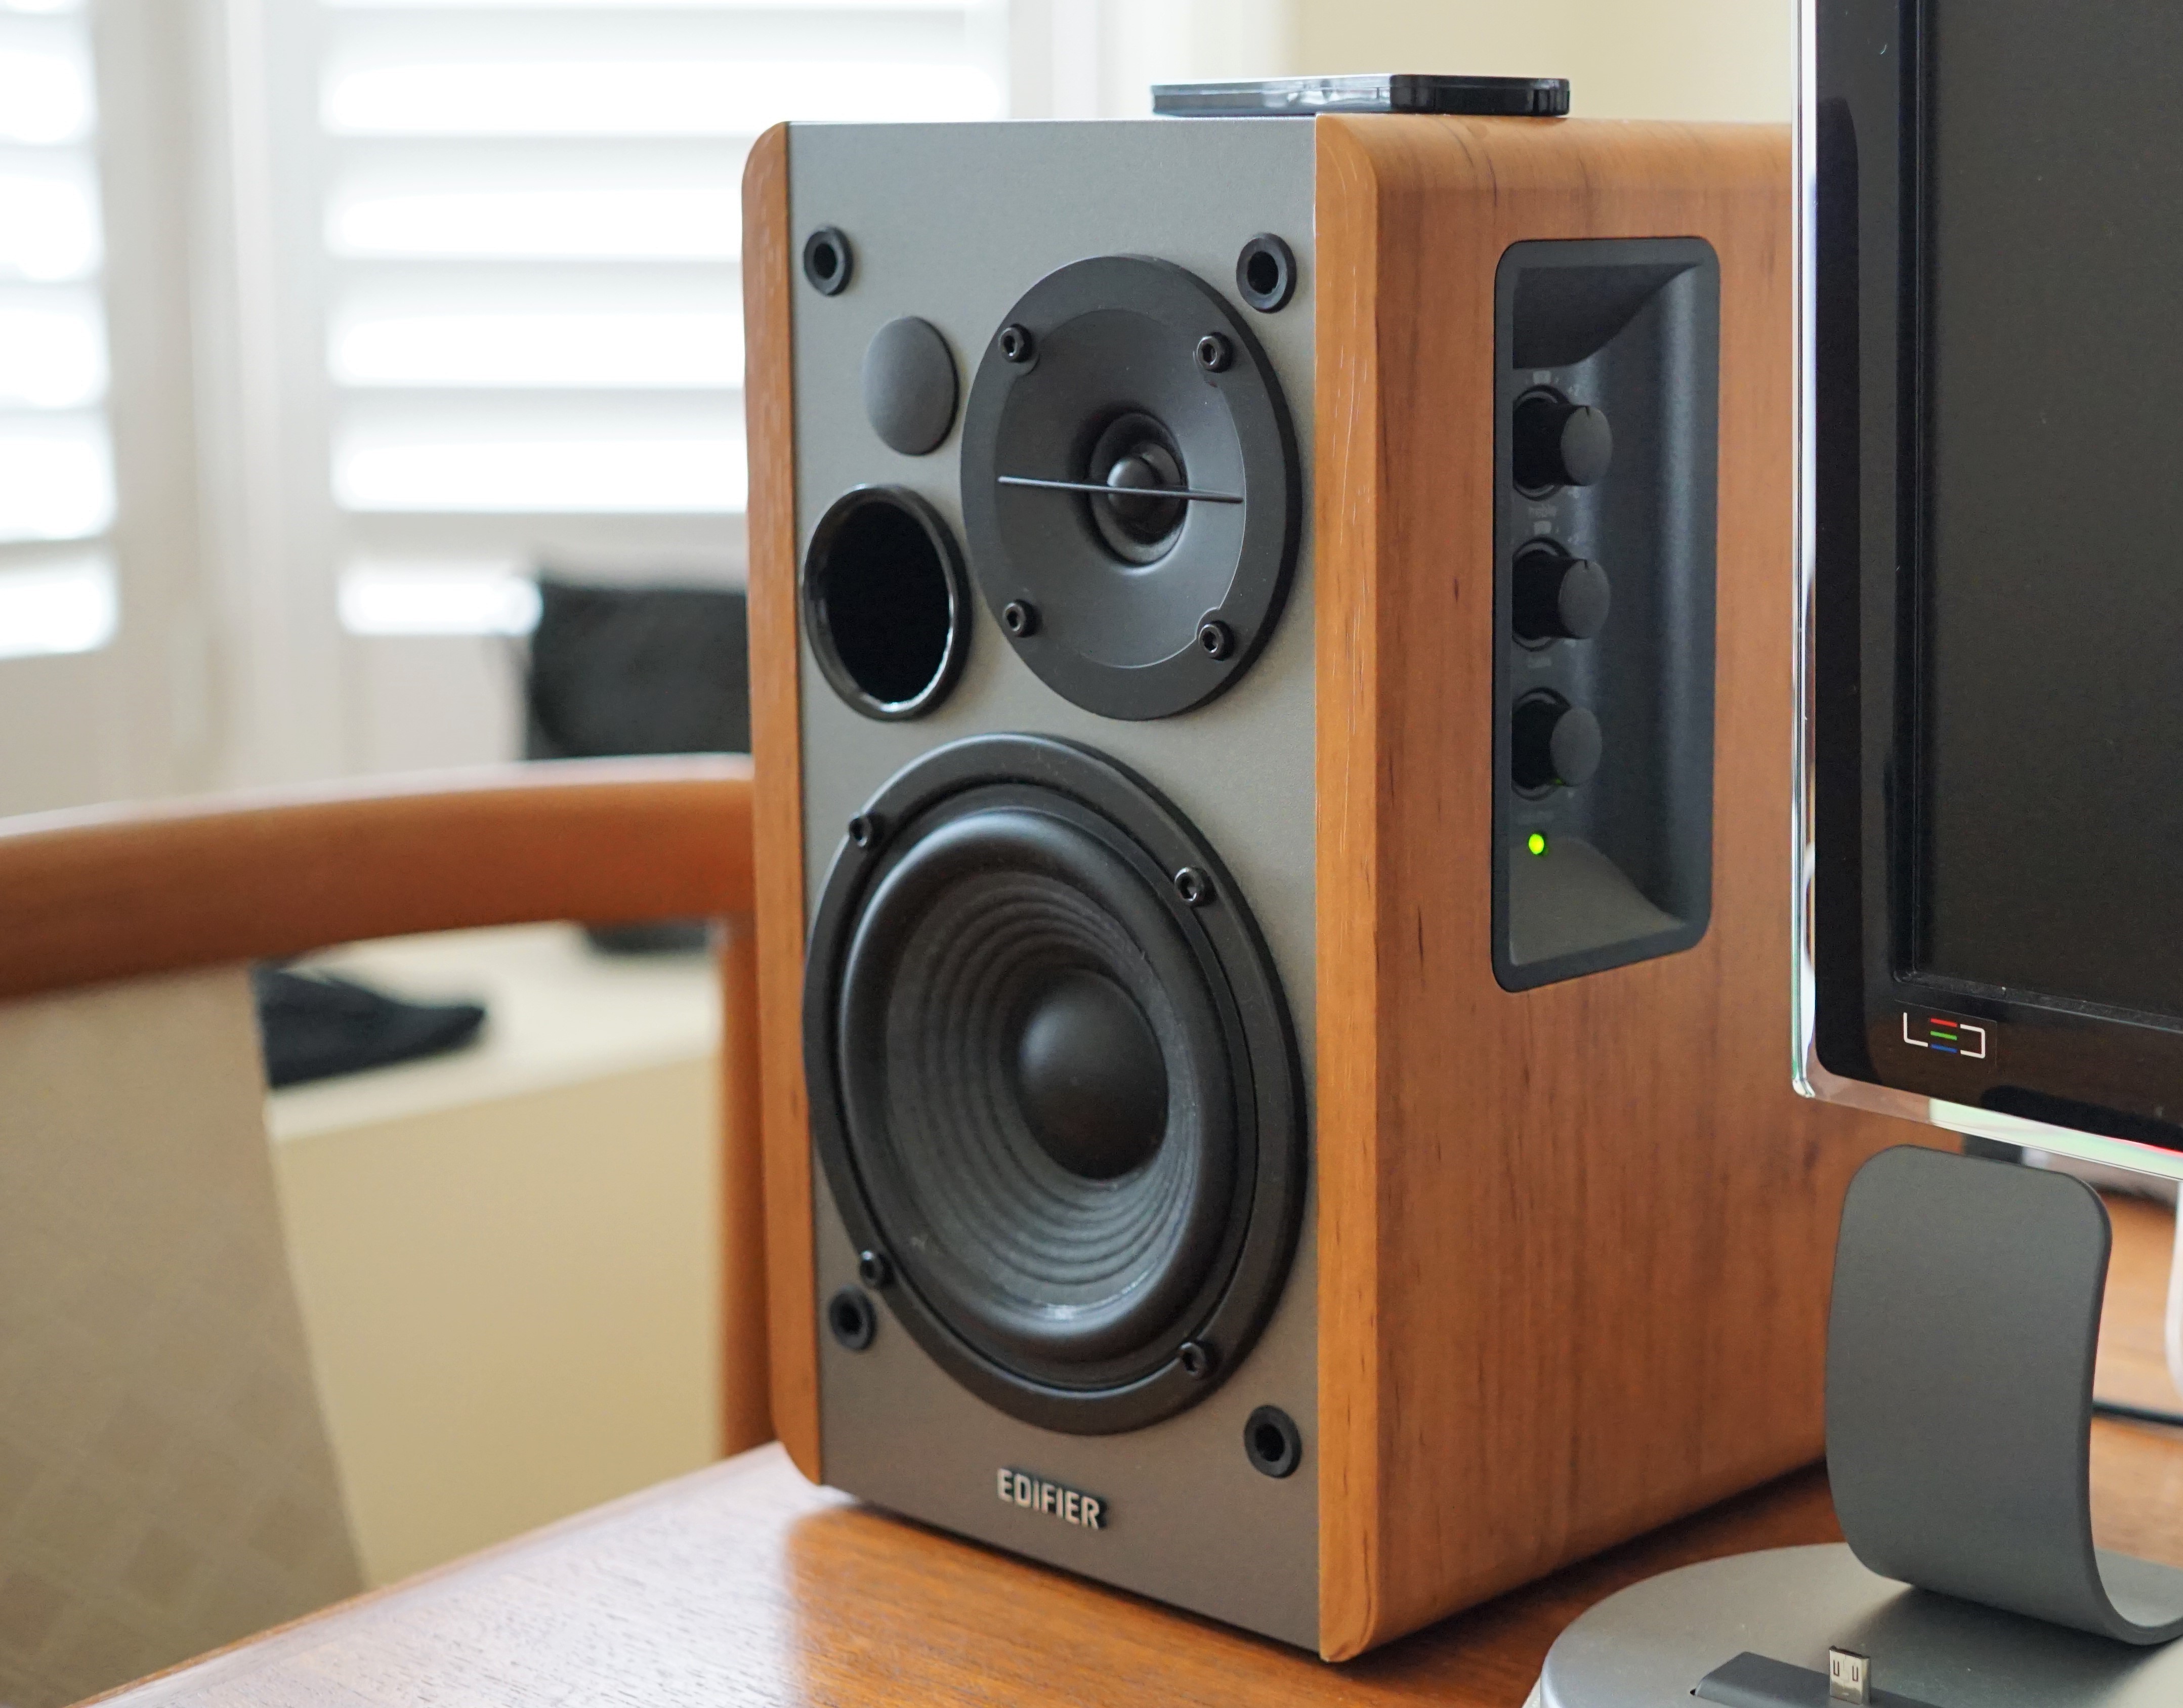 Edifier R1280T Powered Bookshelf Speakers  Active Near Field Monitors  - Studio Monitor Speaker - Wooden Enclosure - 42 Watts RMS - Reviews |  Headphone Reviews and Discussion 